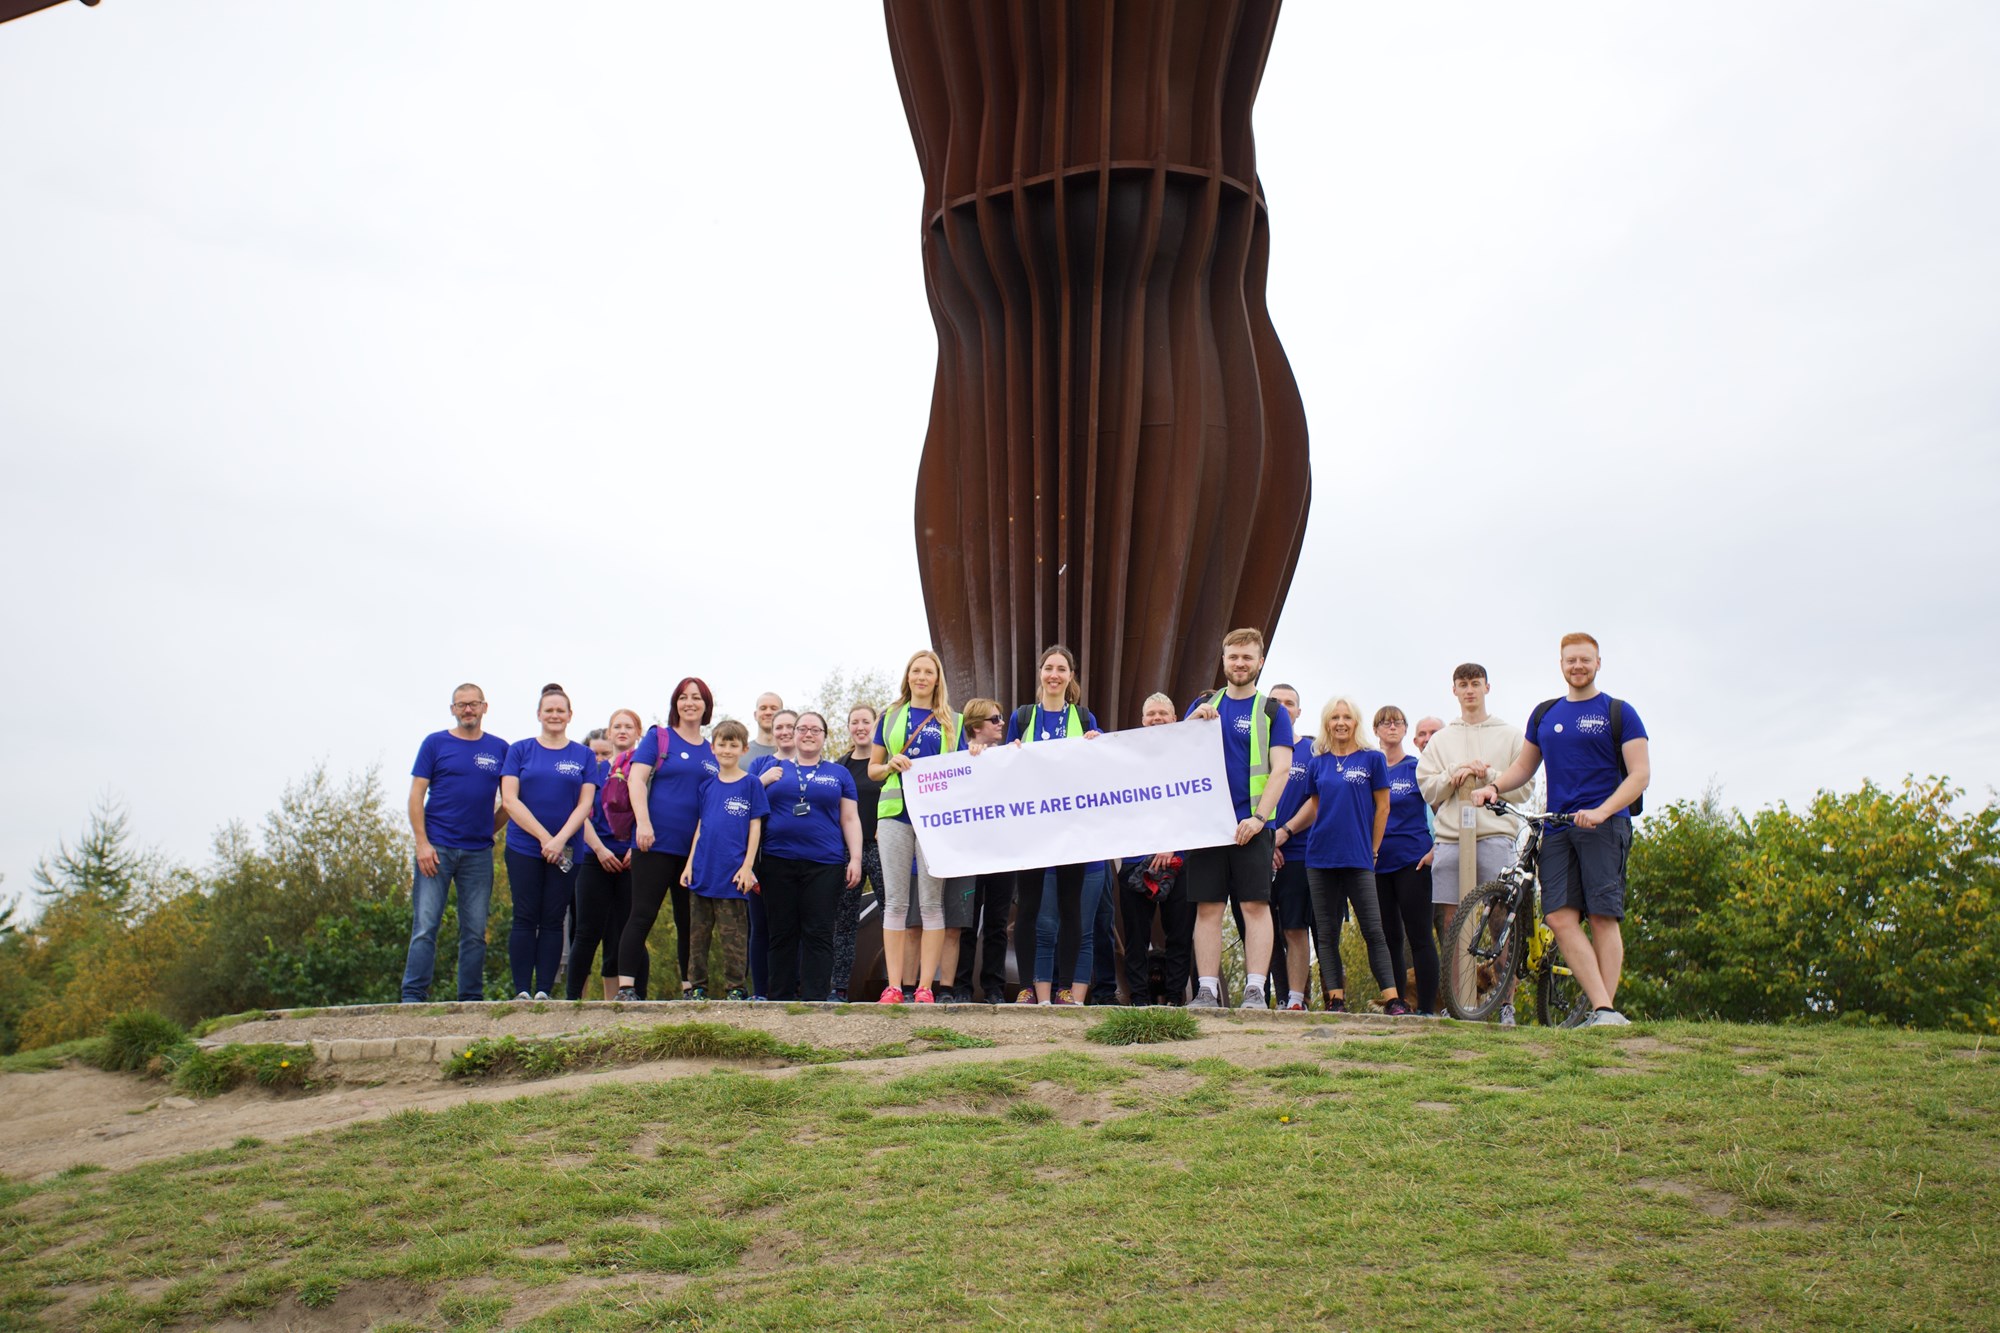 Changing Lives staff members stood in front of the Angel of the North after completing the staff walk of their annual fundraiser, 50K Your Way, holding a banner which reads "Together We Are Changing Lives."